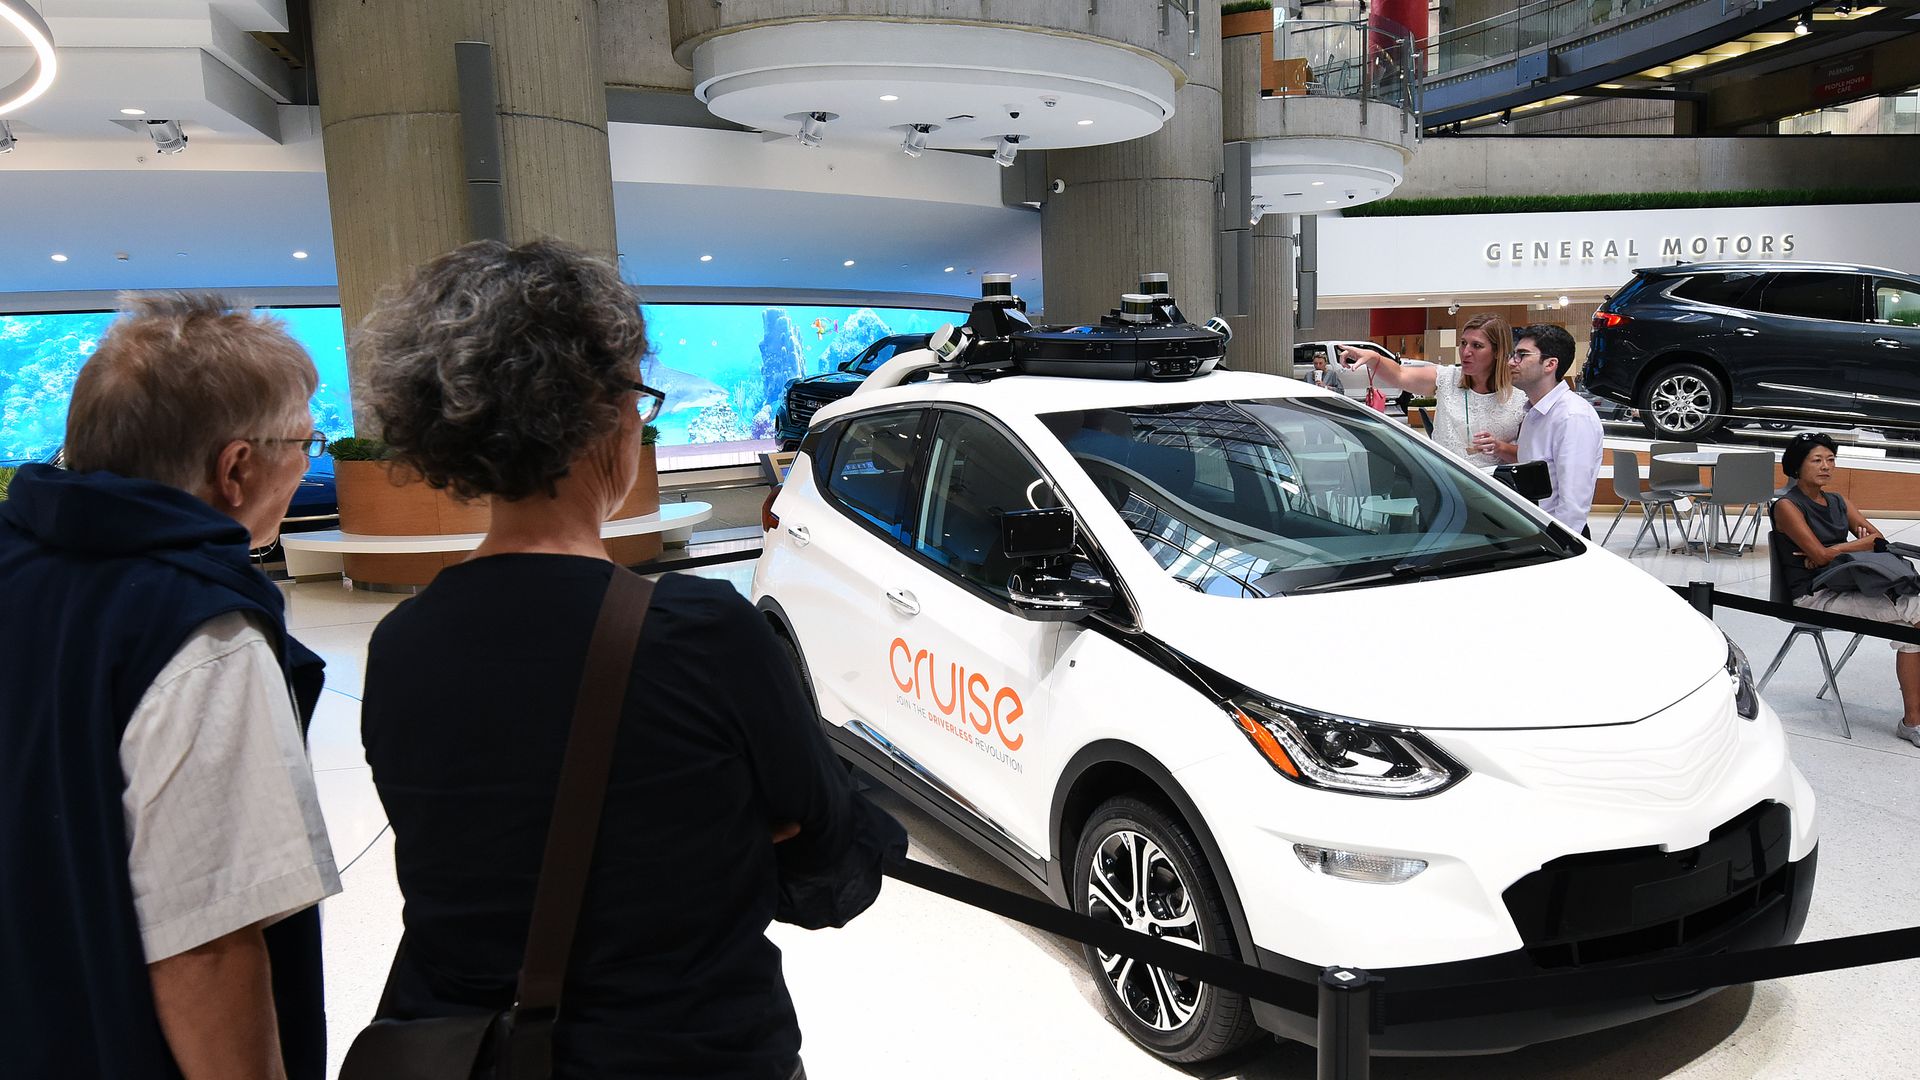 People admire a GM Cruise self-driving car on display at the General Motors world headquarters 